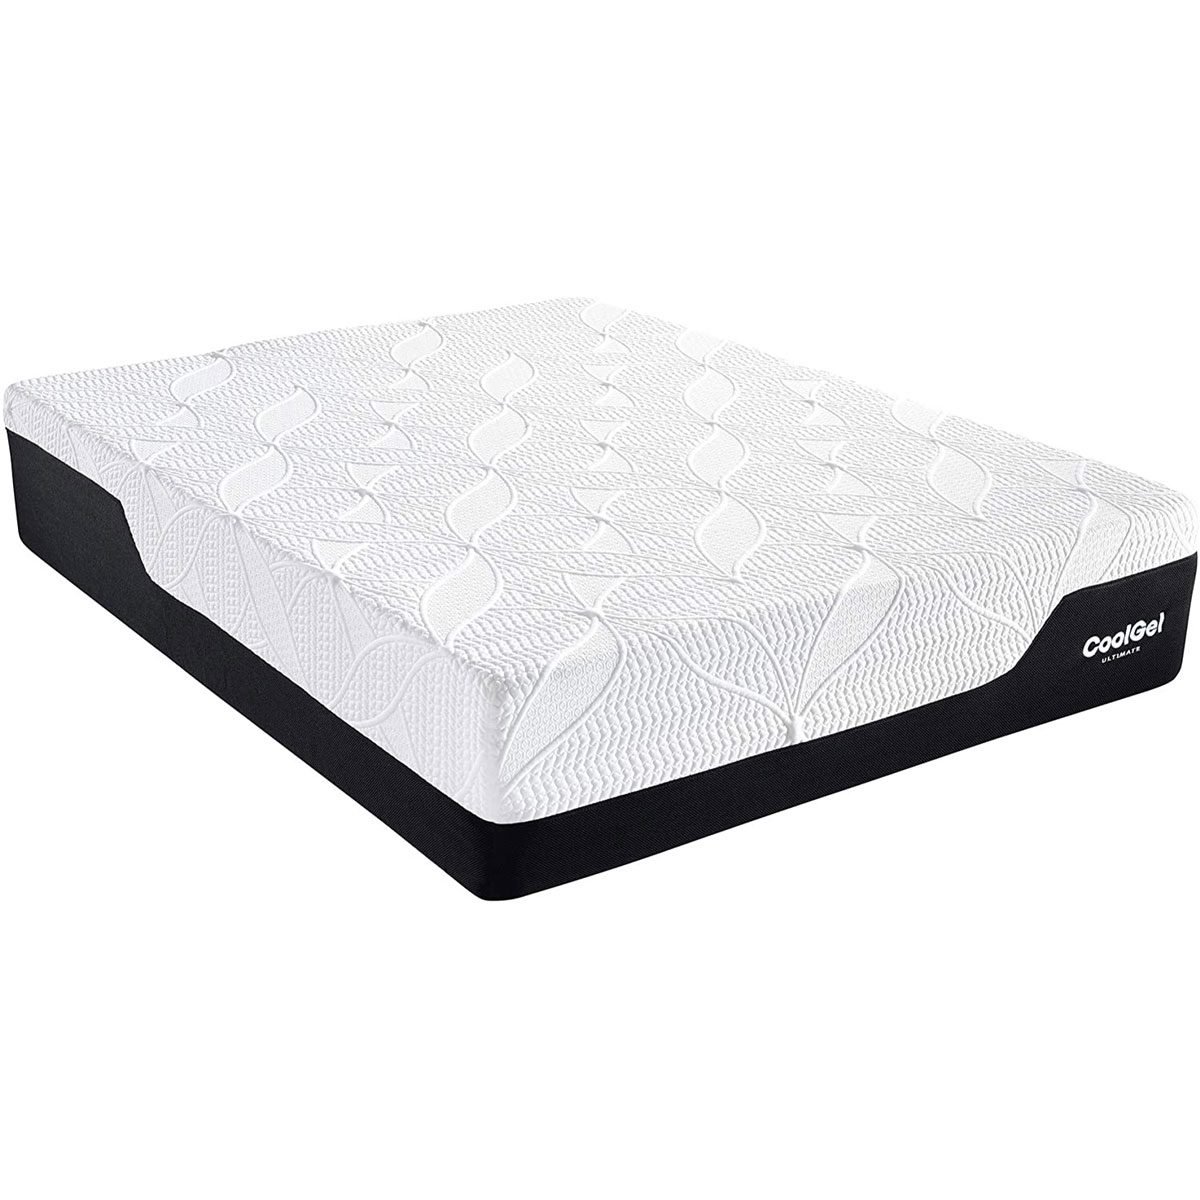 10 Best Mattress Sales for Labor Day The Family Handyman